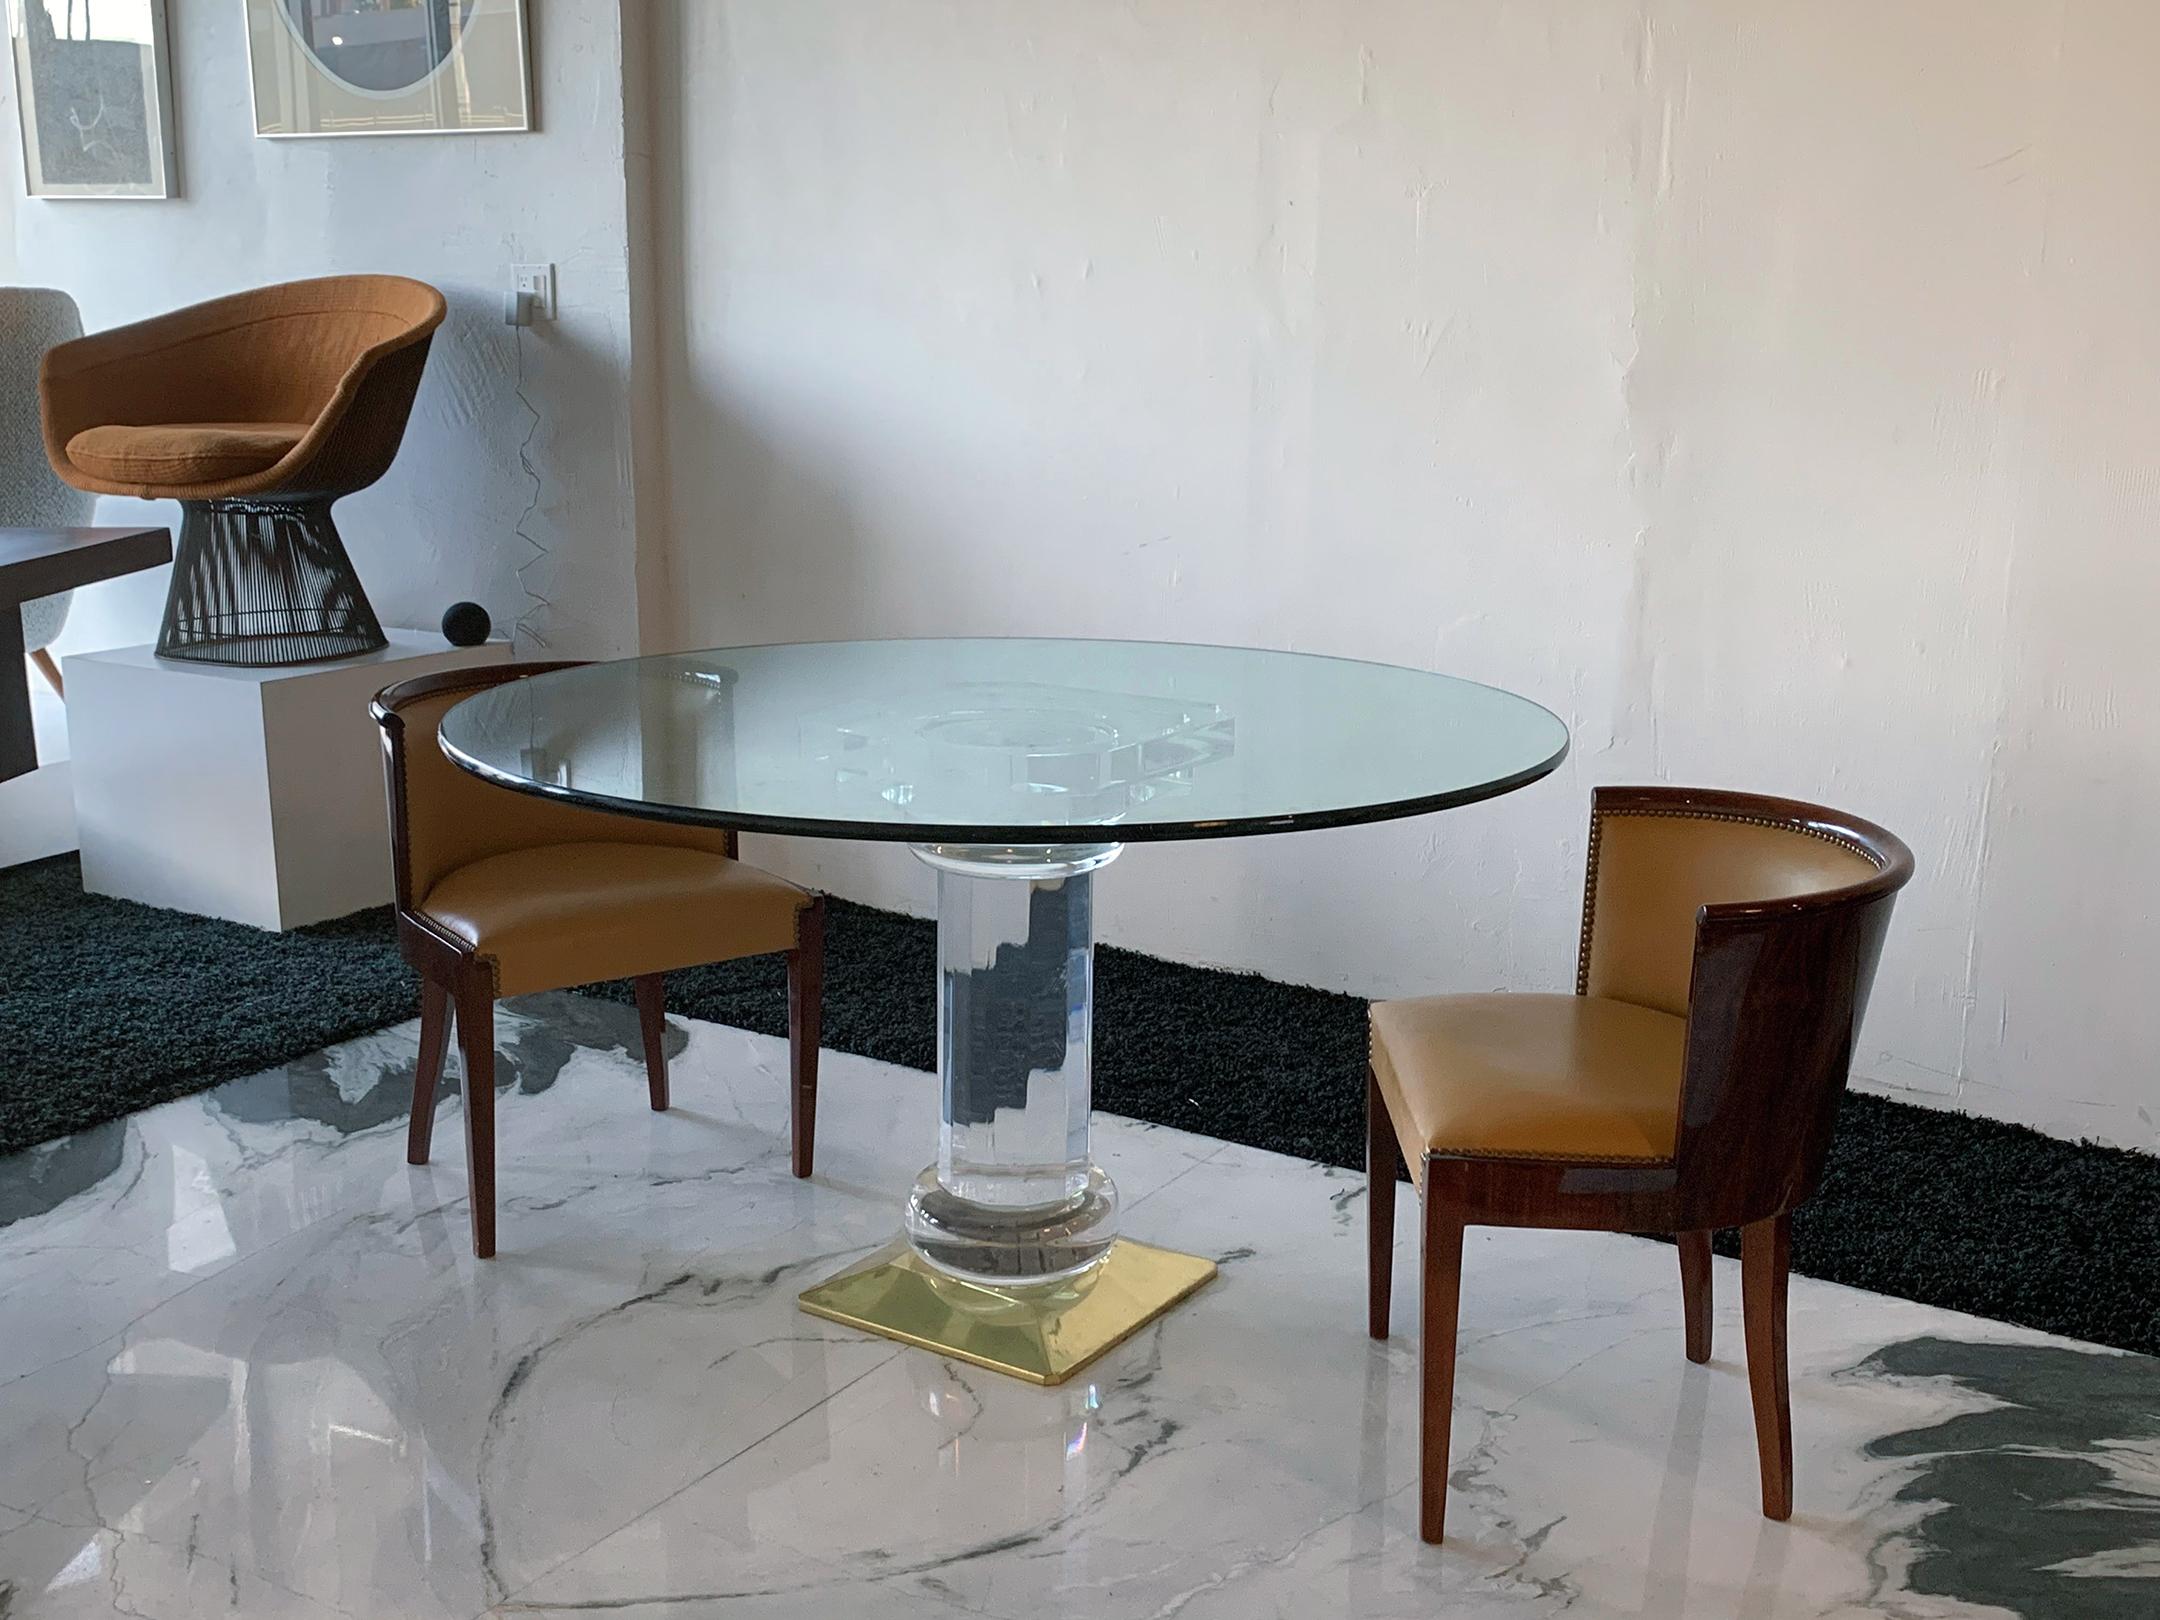 Available right now we have this stunning Italian acrylic and brass dining table, circa 1970s. The table base is comprised of solid acrylic with a square brass plated footing. This dining table would effortlessly blend with any type of Regency,